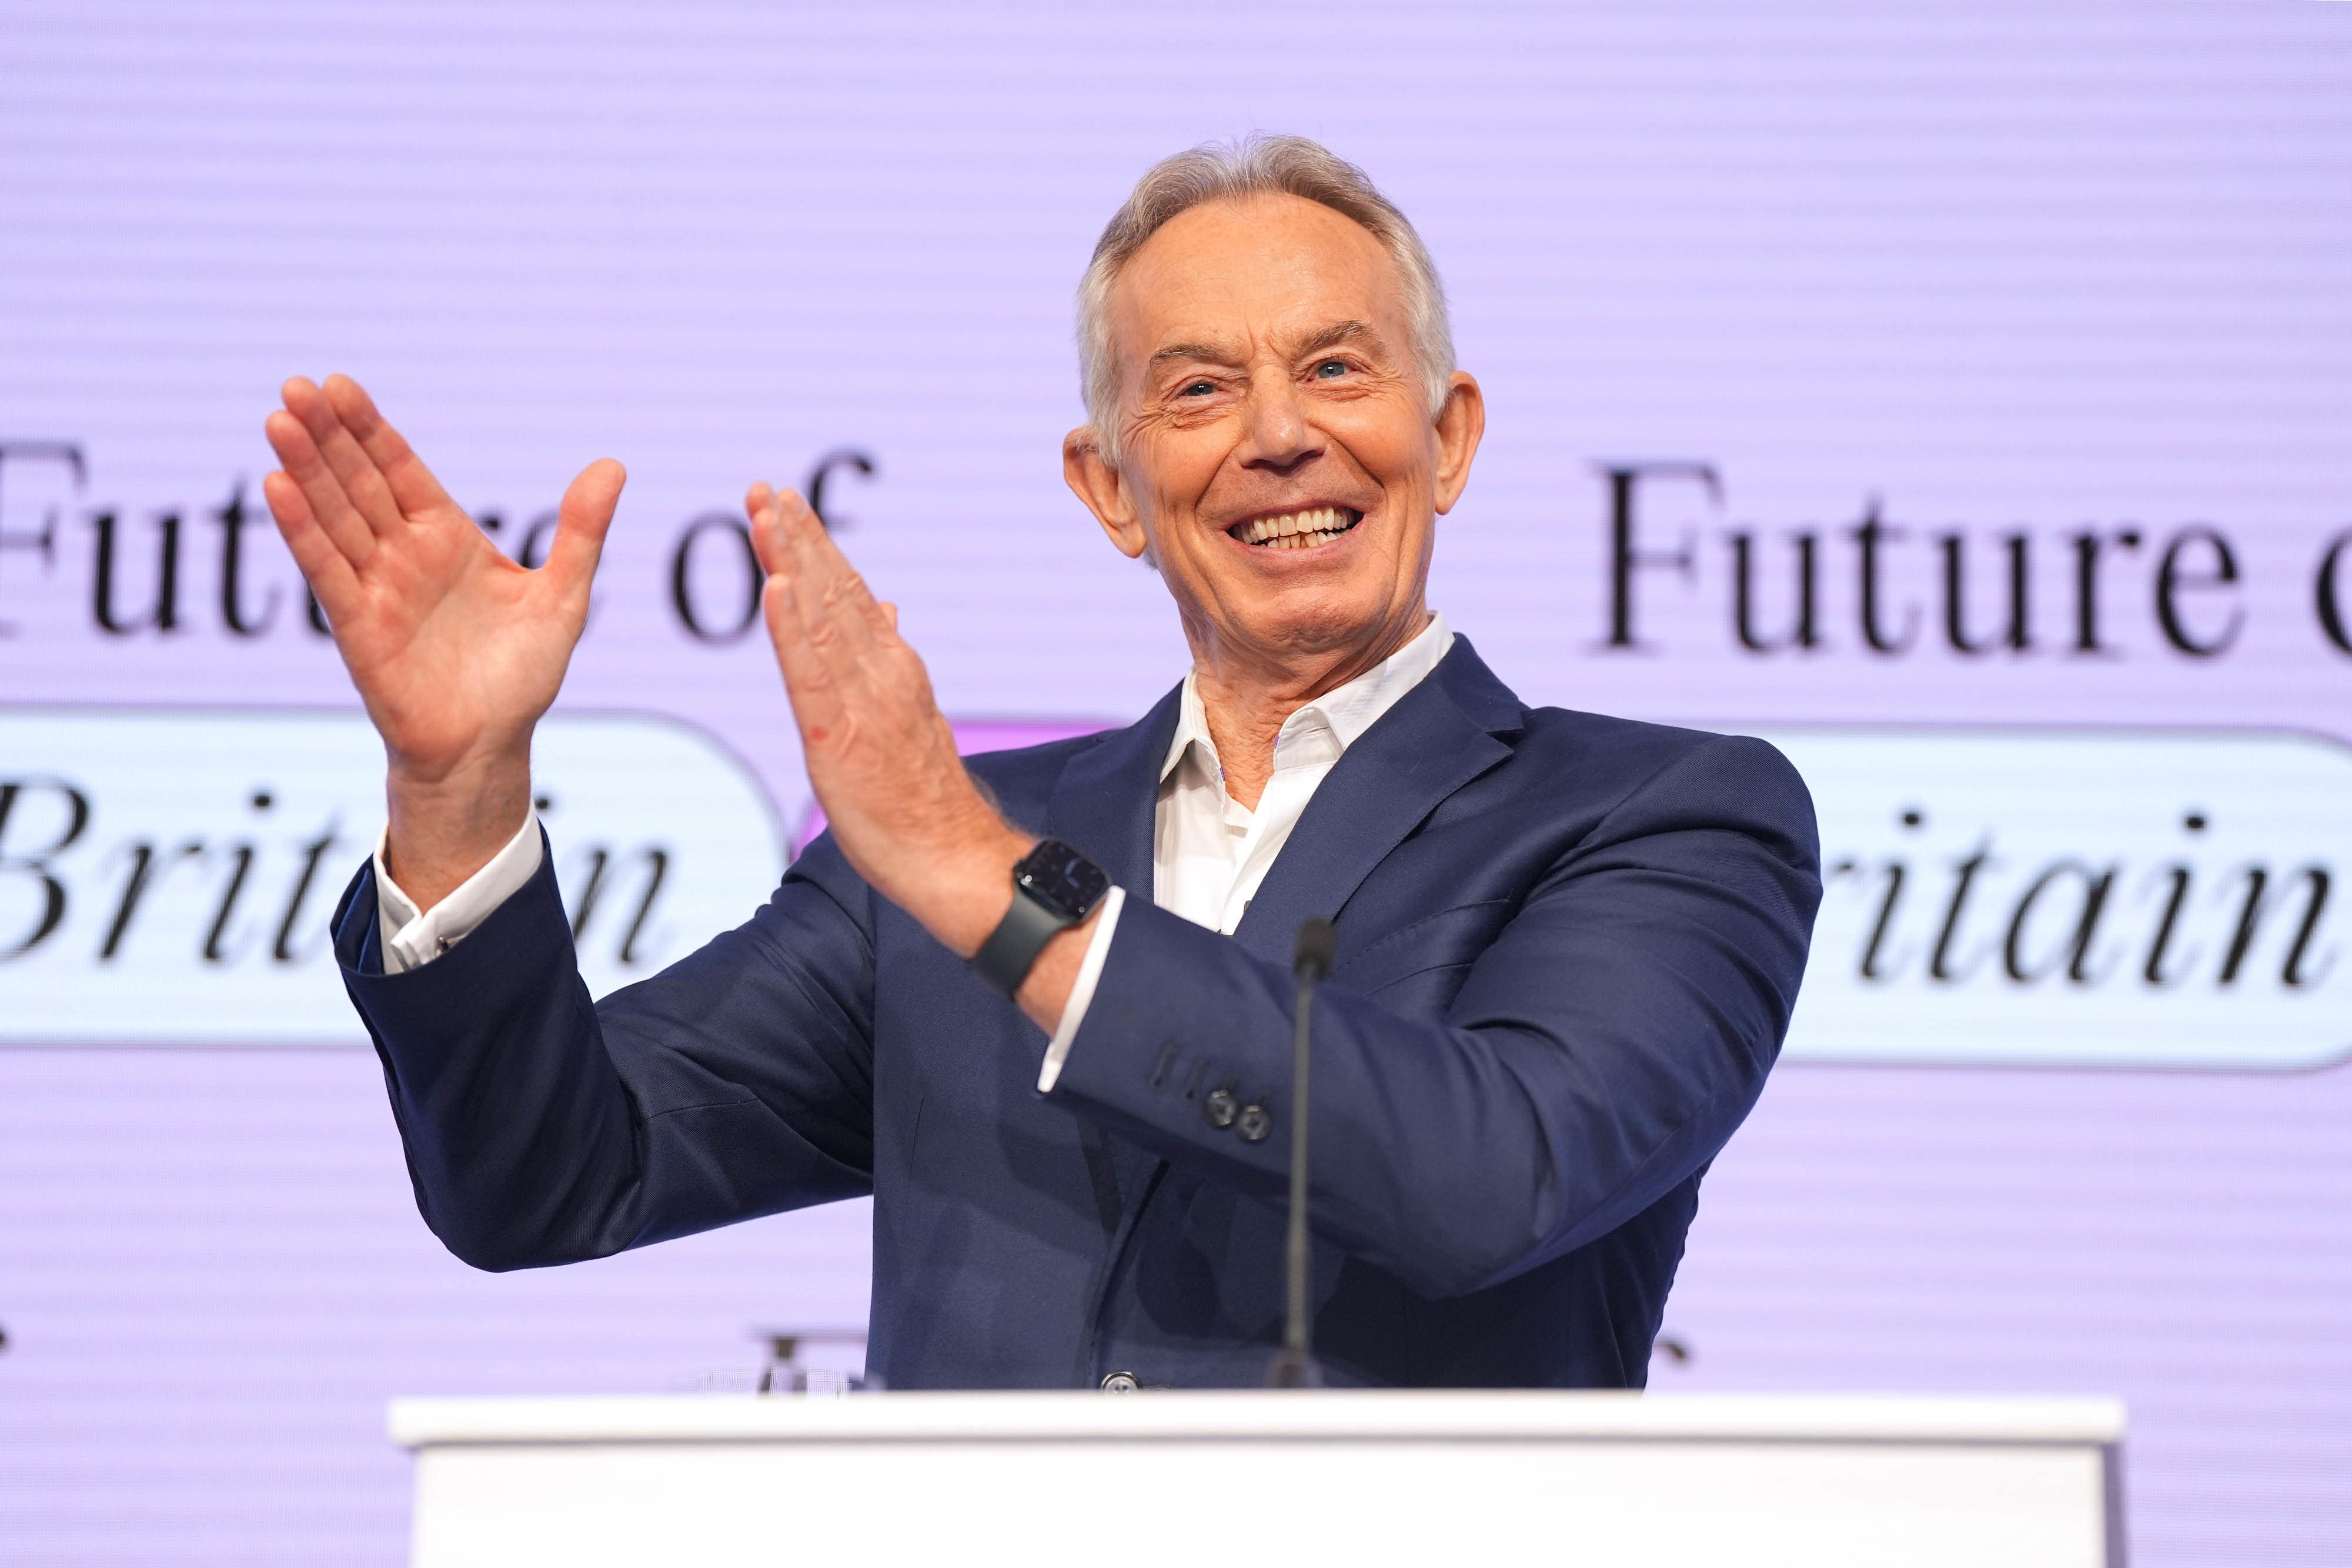 Tony Blair said his successor, Keir Starmer, will need to improve growth and productivity and drive value and efficiency through public spending